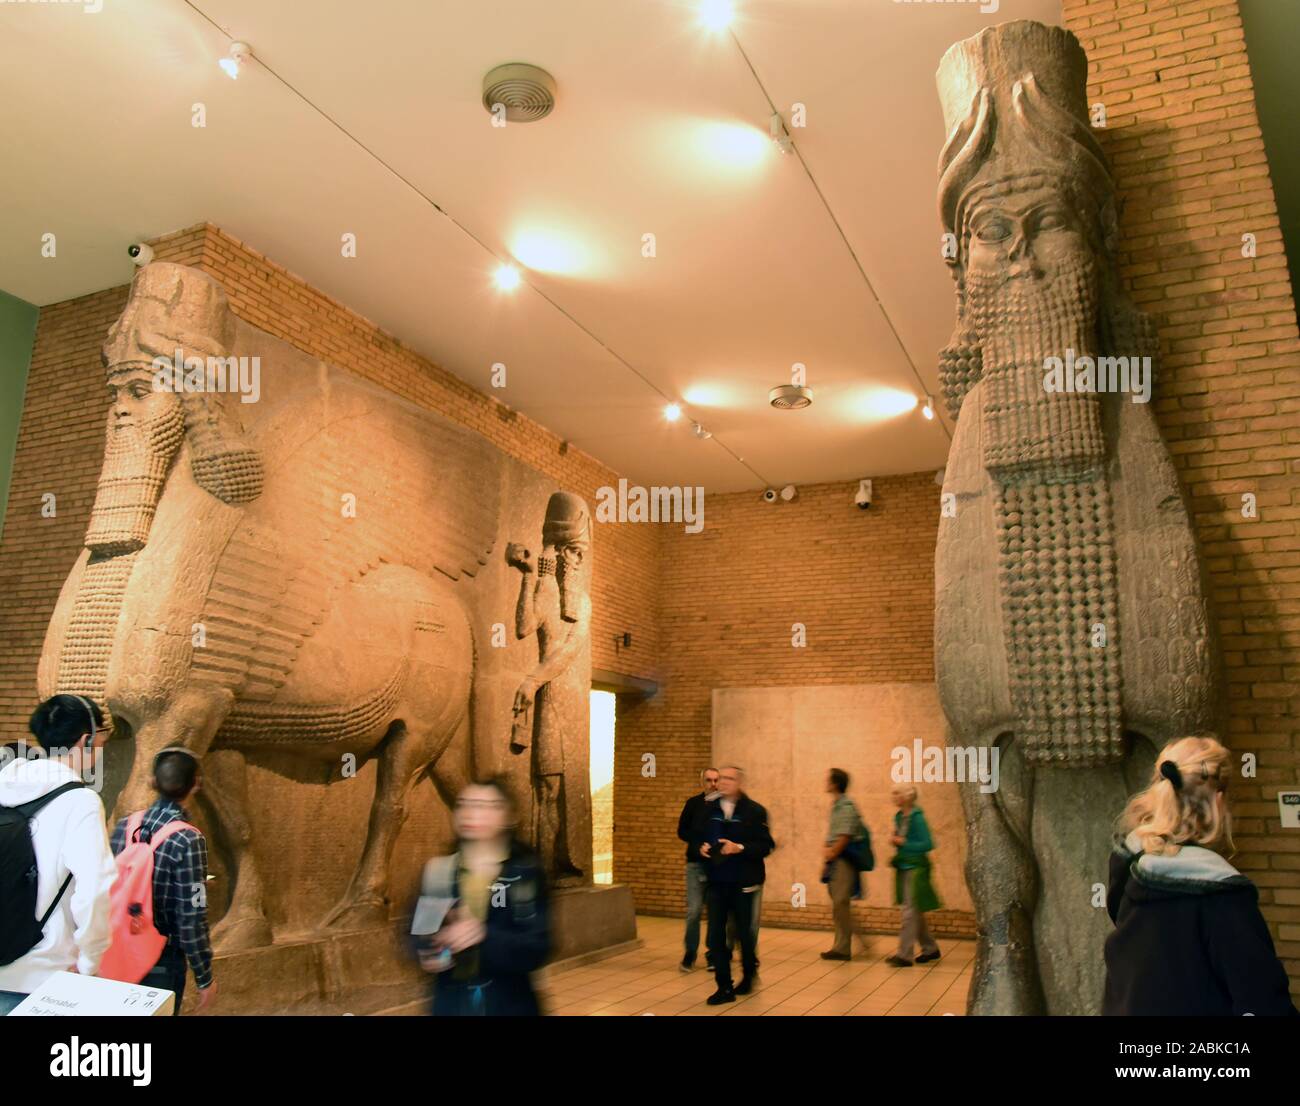 London, UK. 06th Sep, 2019. Gatekeeper figures from the palace of the Assyrian ruler Sargon II in Khorsabad. Ruins of the palace from the 8th century BC were destroyed by the ISS in 2015. Credit: Waltraud Grubitzsch/dpa-Zentralbild/ZB/dpa/Alamy Live News Stock Photo